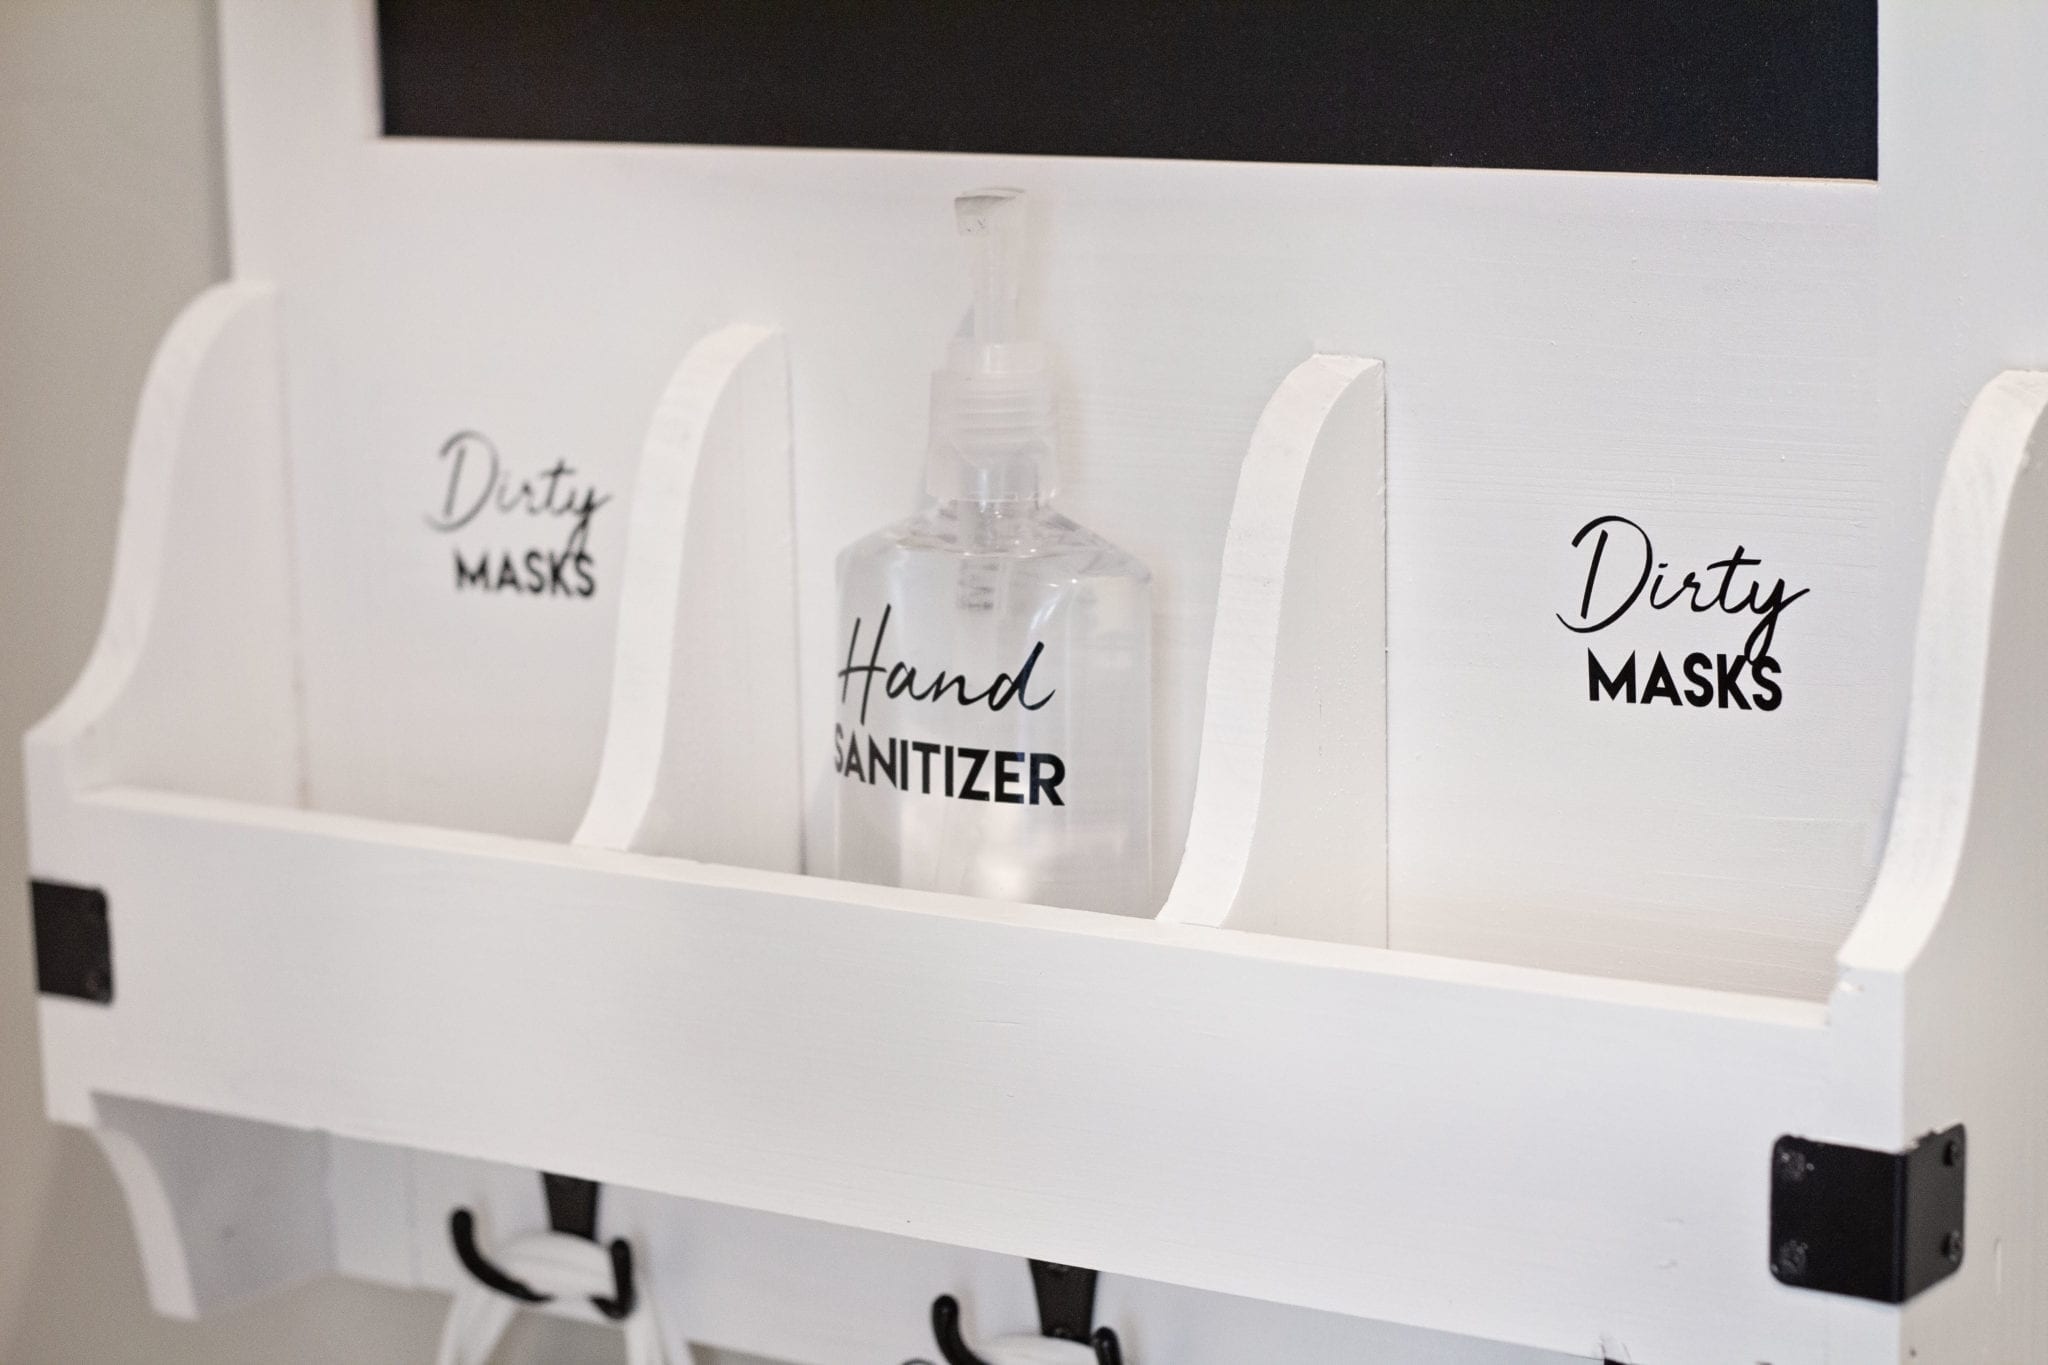 Mask Organizer with Labels for Dirty Masks